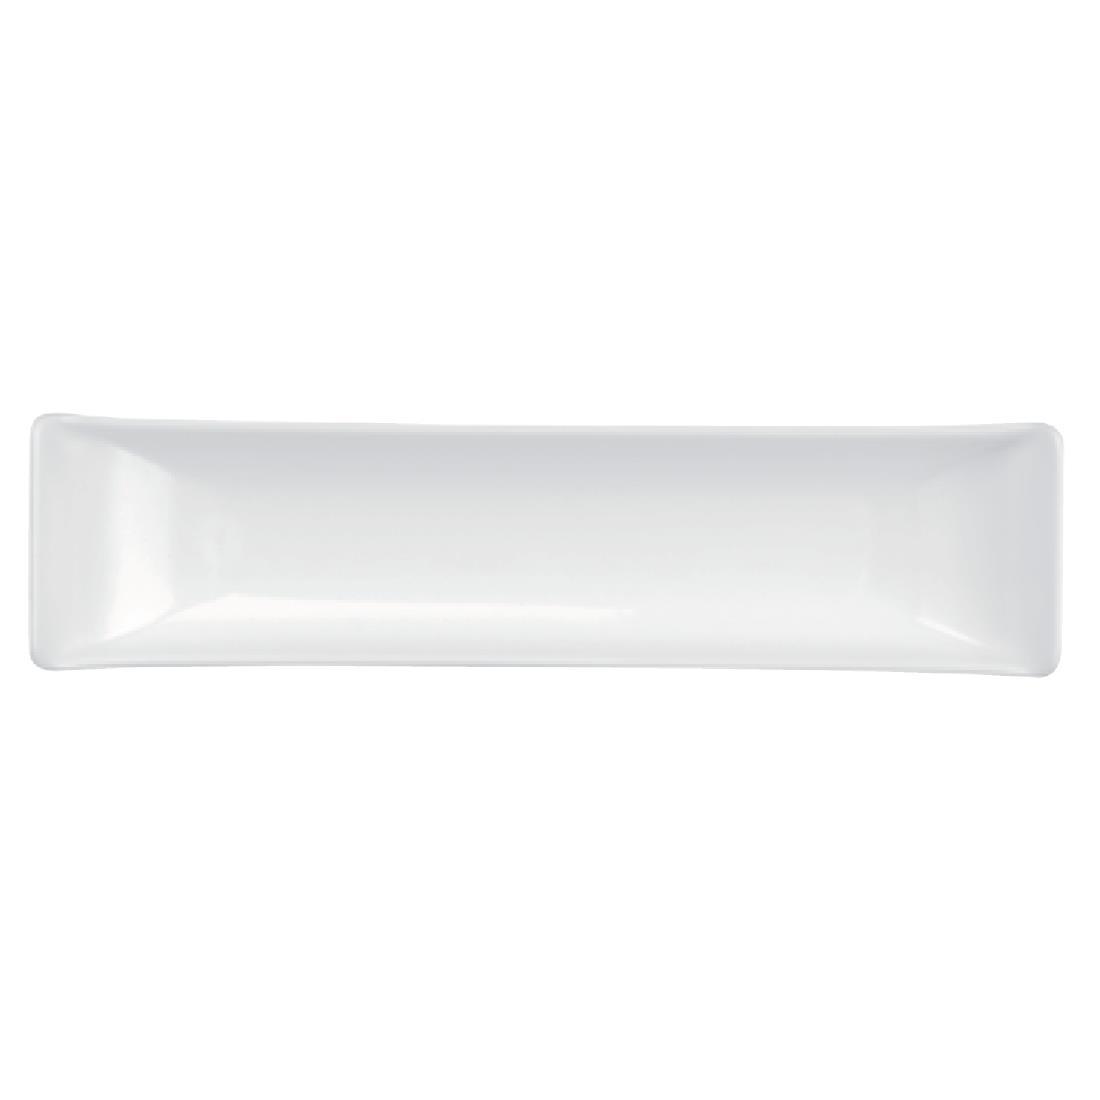 Churchill Alchemy Buffet Boat Dishes 392mm (Pack of 6) - W122  - 1